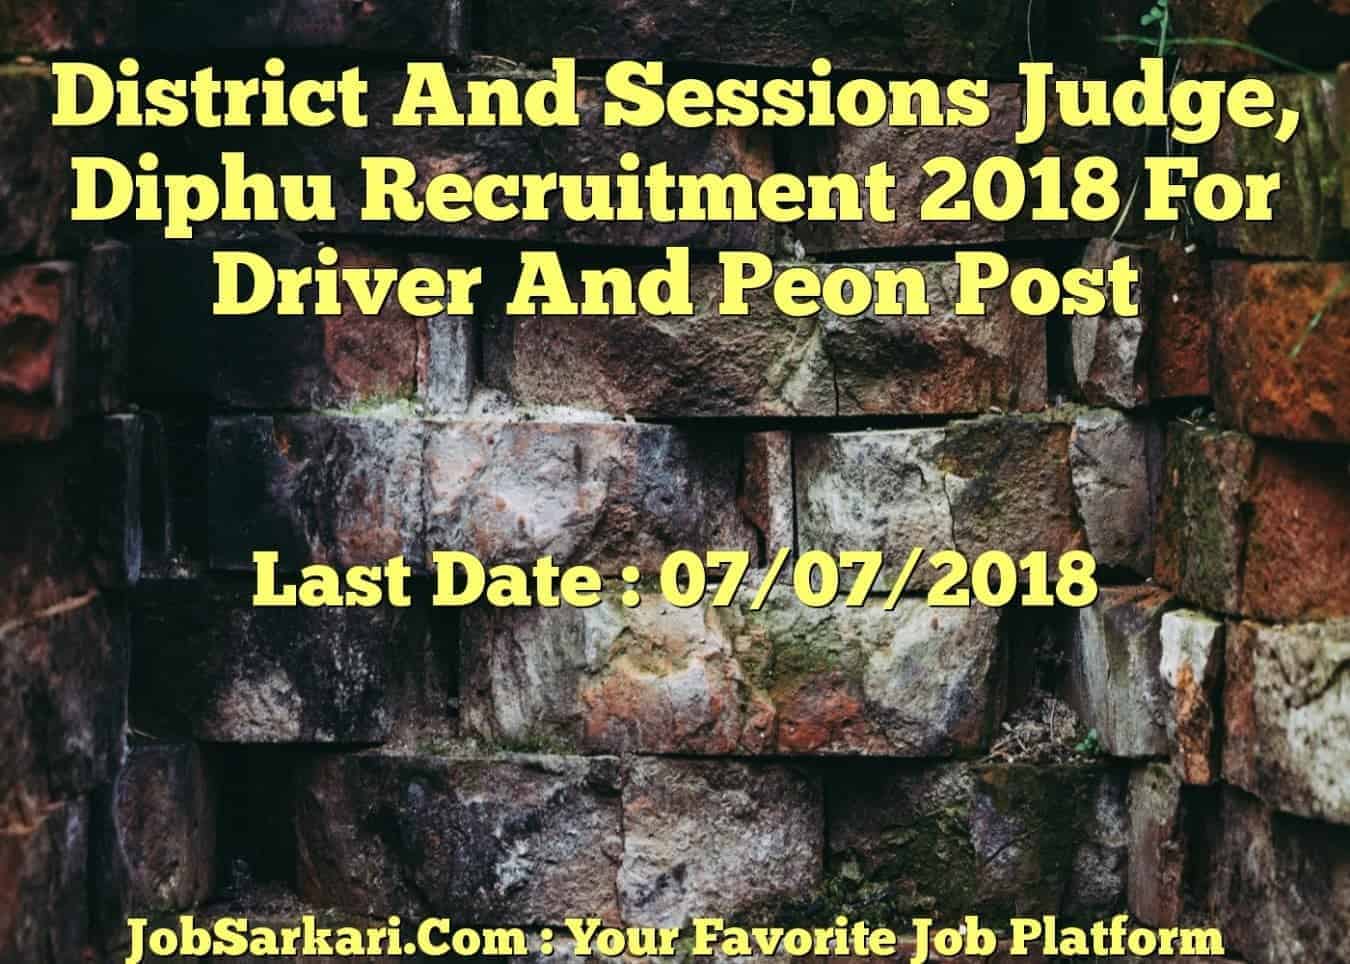 District And Sessions Judge, Diphu Recruitment 2018 For Driver And Peon Post